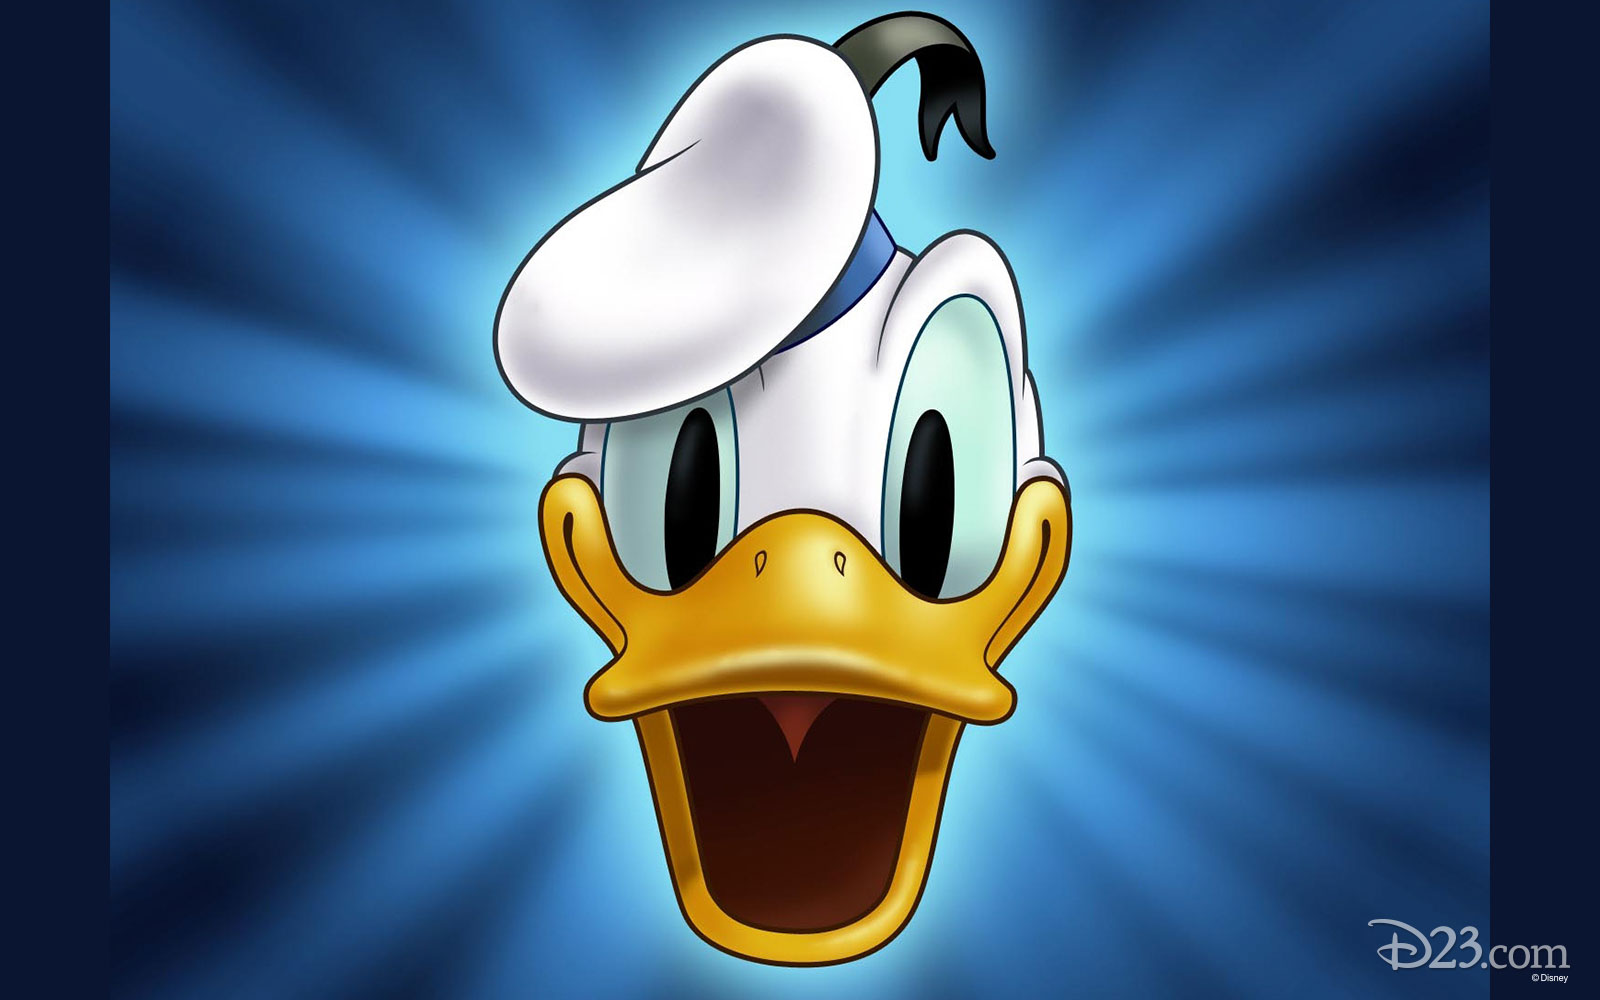 Prove You're a Wise Little Hen with this Donald Duck Trivia Quiz - D23